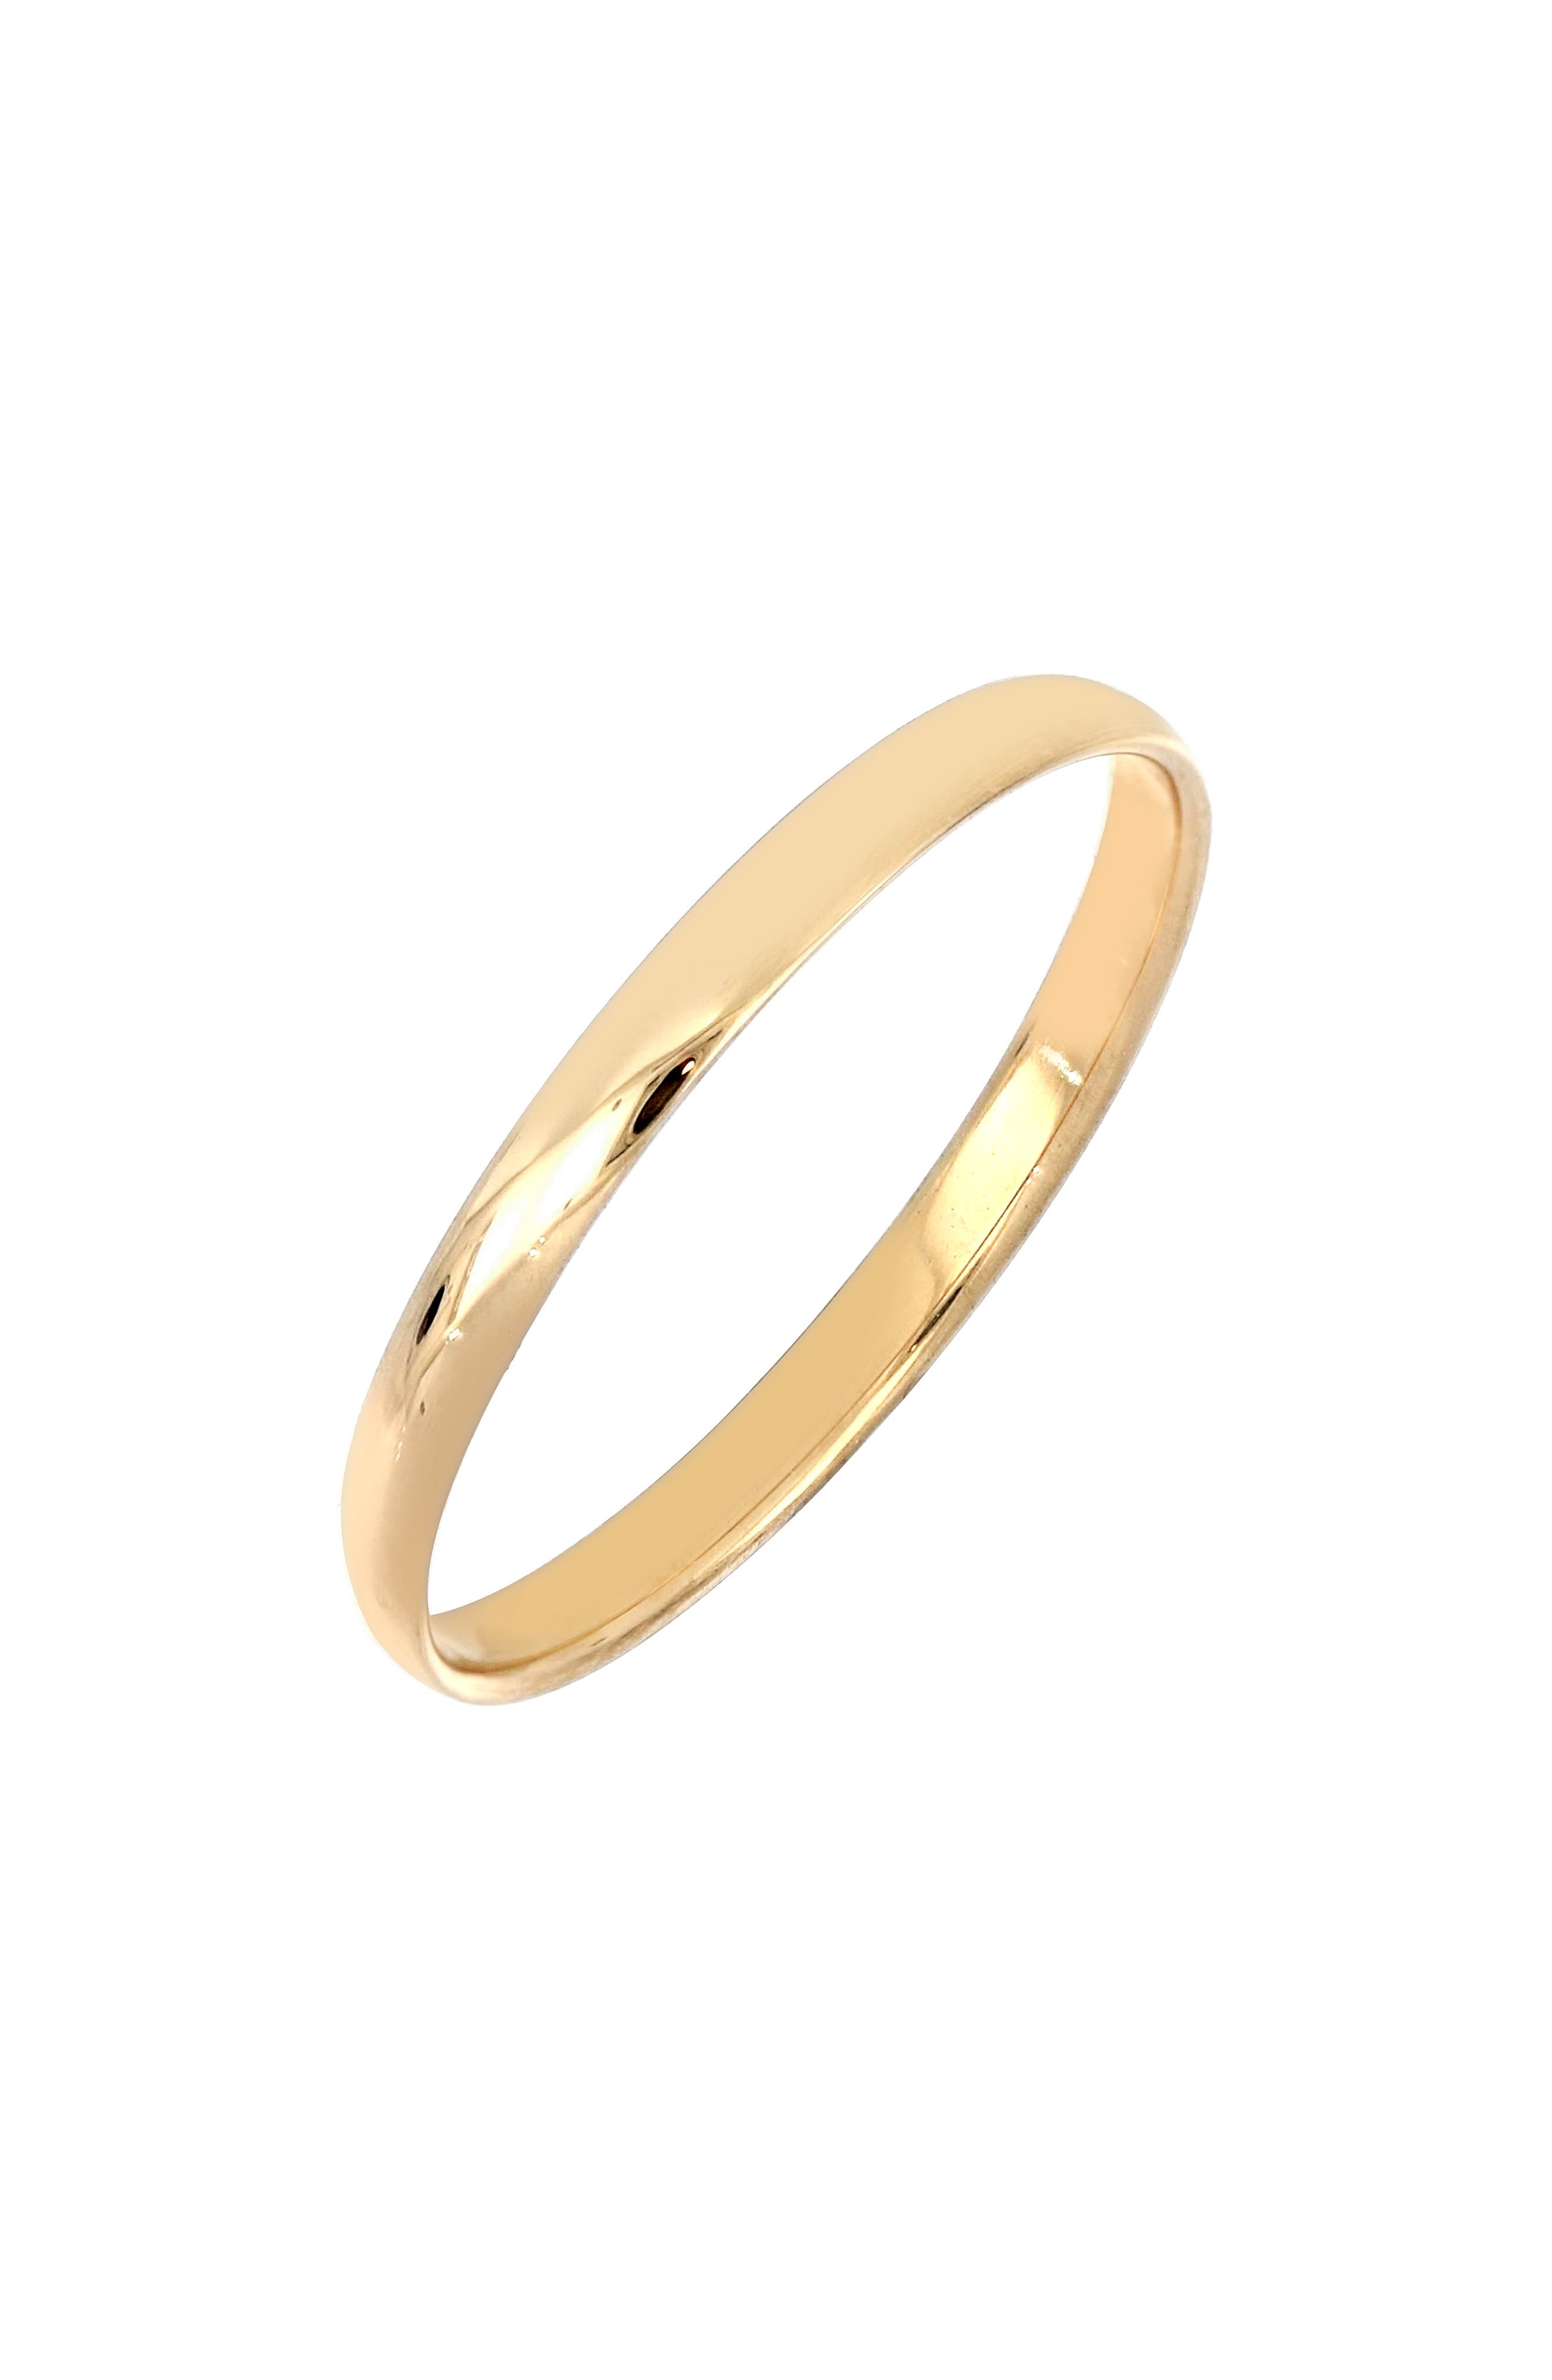 Women's Gold Ring Gold Rings For Women Simple Gold Ring Oval Hammered Ring Hammered Gold Ring Rings For Women Statement Ring